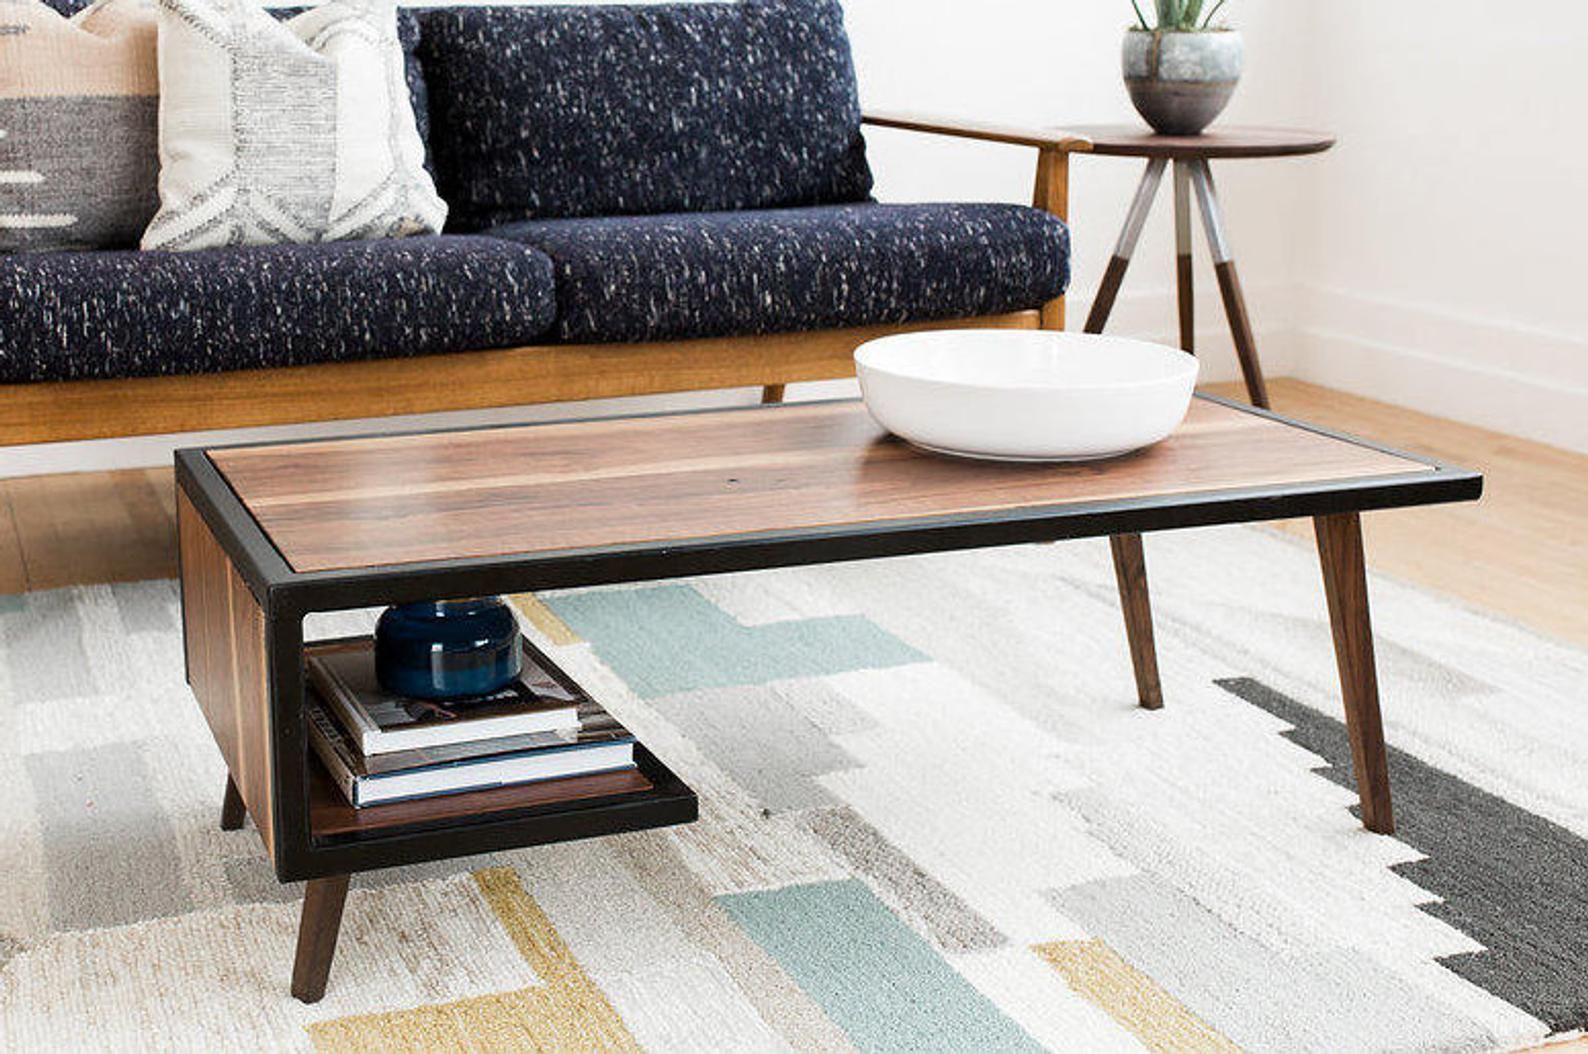 Mid Century Modern Style Coffee Tables You'll Love – Atomic Ranch In Wooden Mid Century Coffee Tables (View 3 of 15)